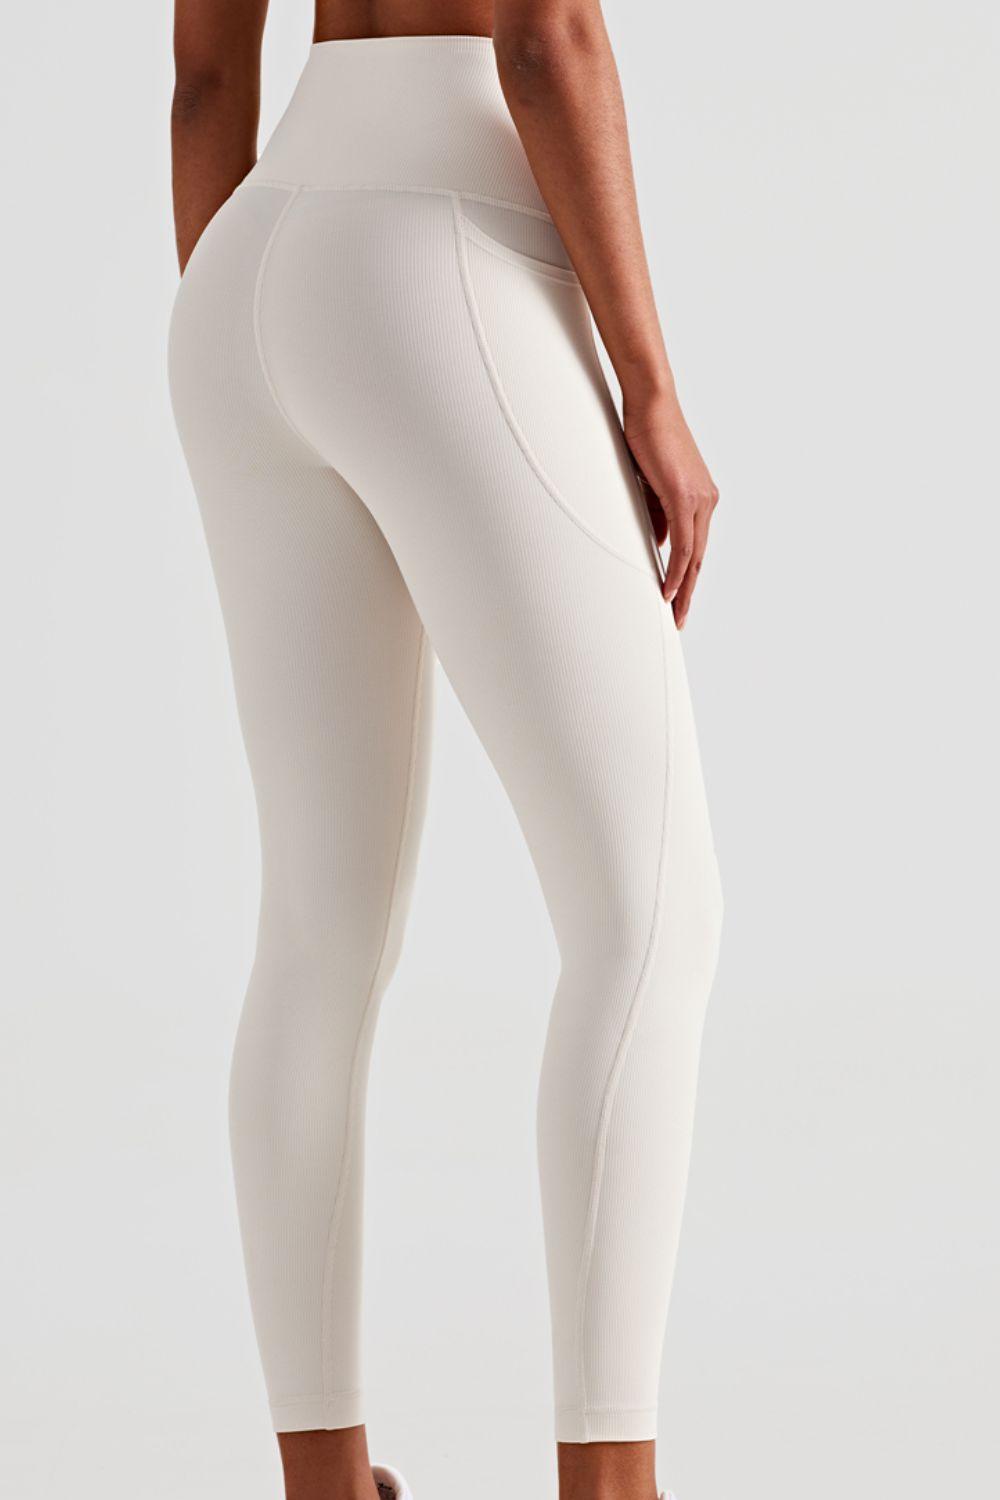 Soft and Breathable High-Waisted Yoga Leggings - Olive Ave